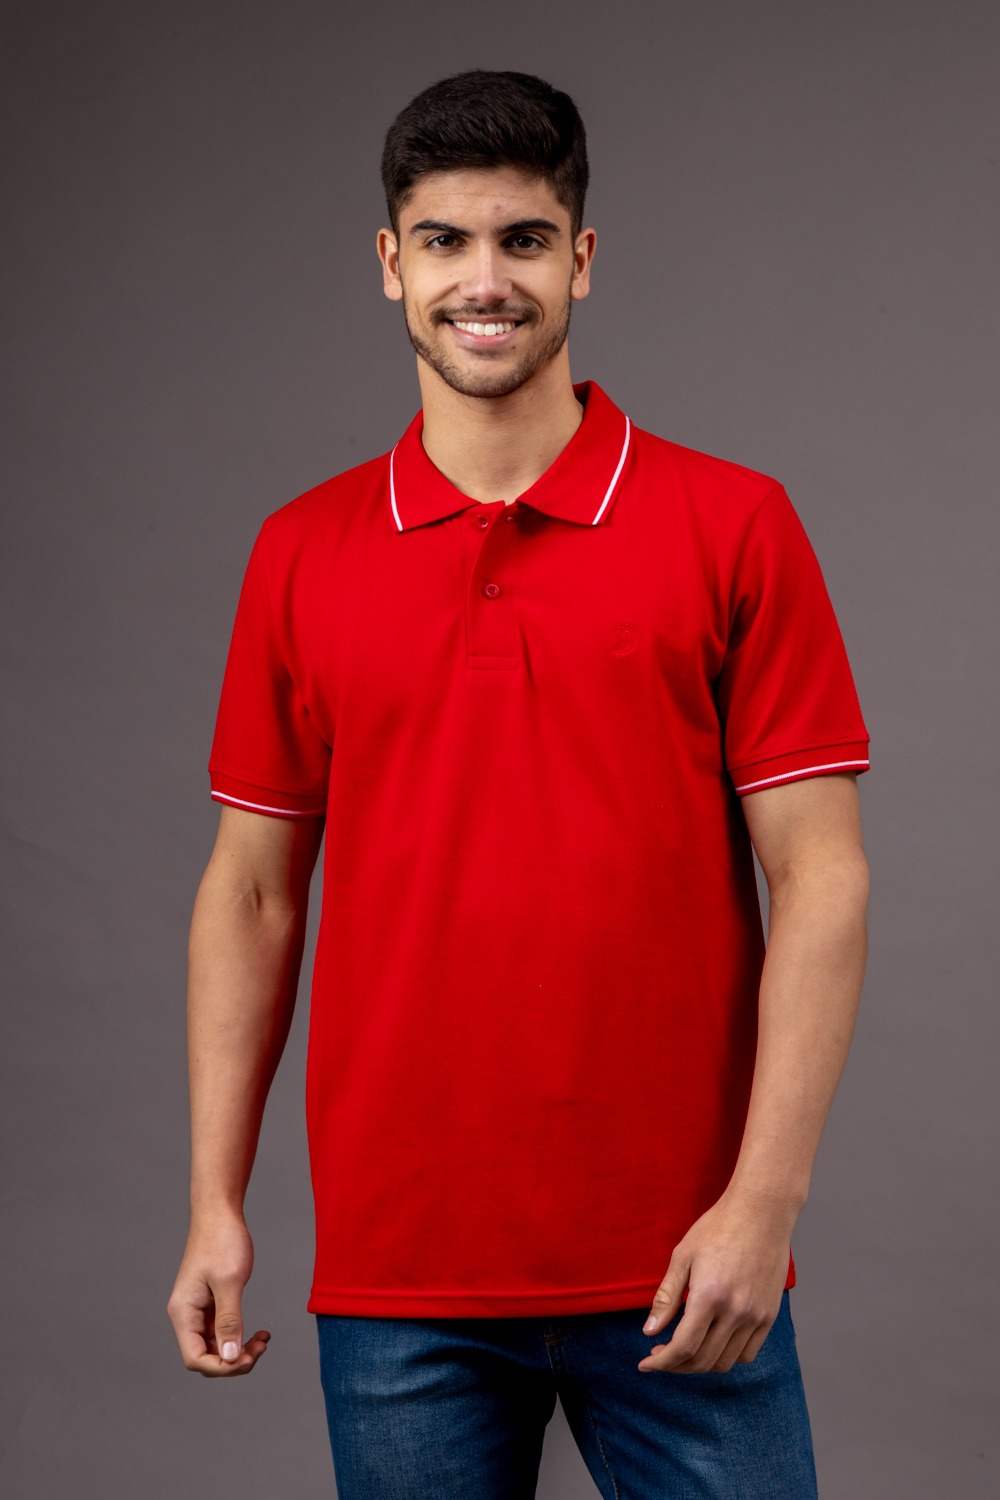 Men's Red Half Sleeves Polo Plain Casual T-Shirt